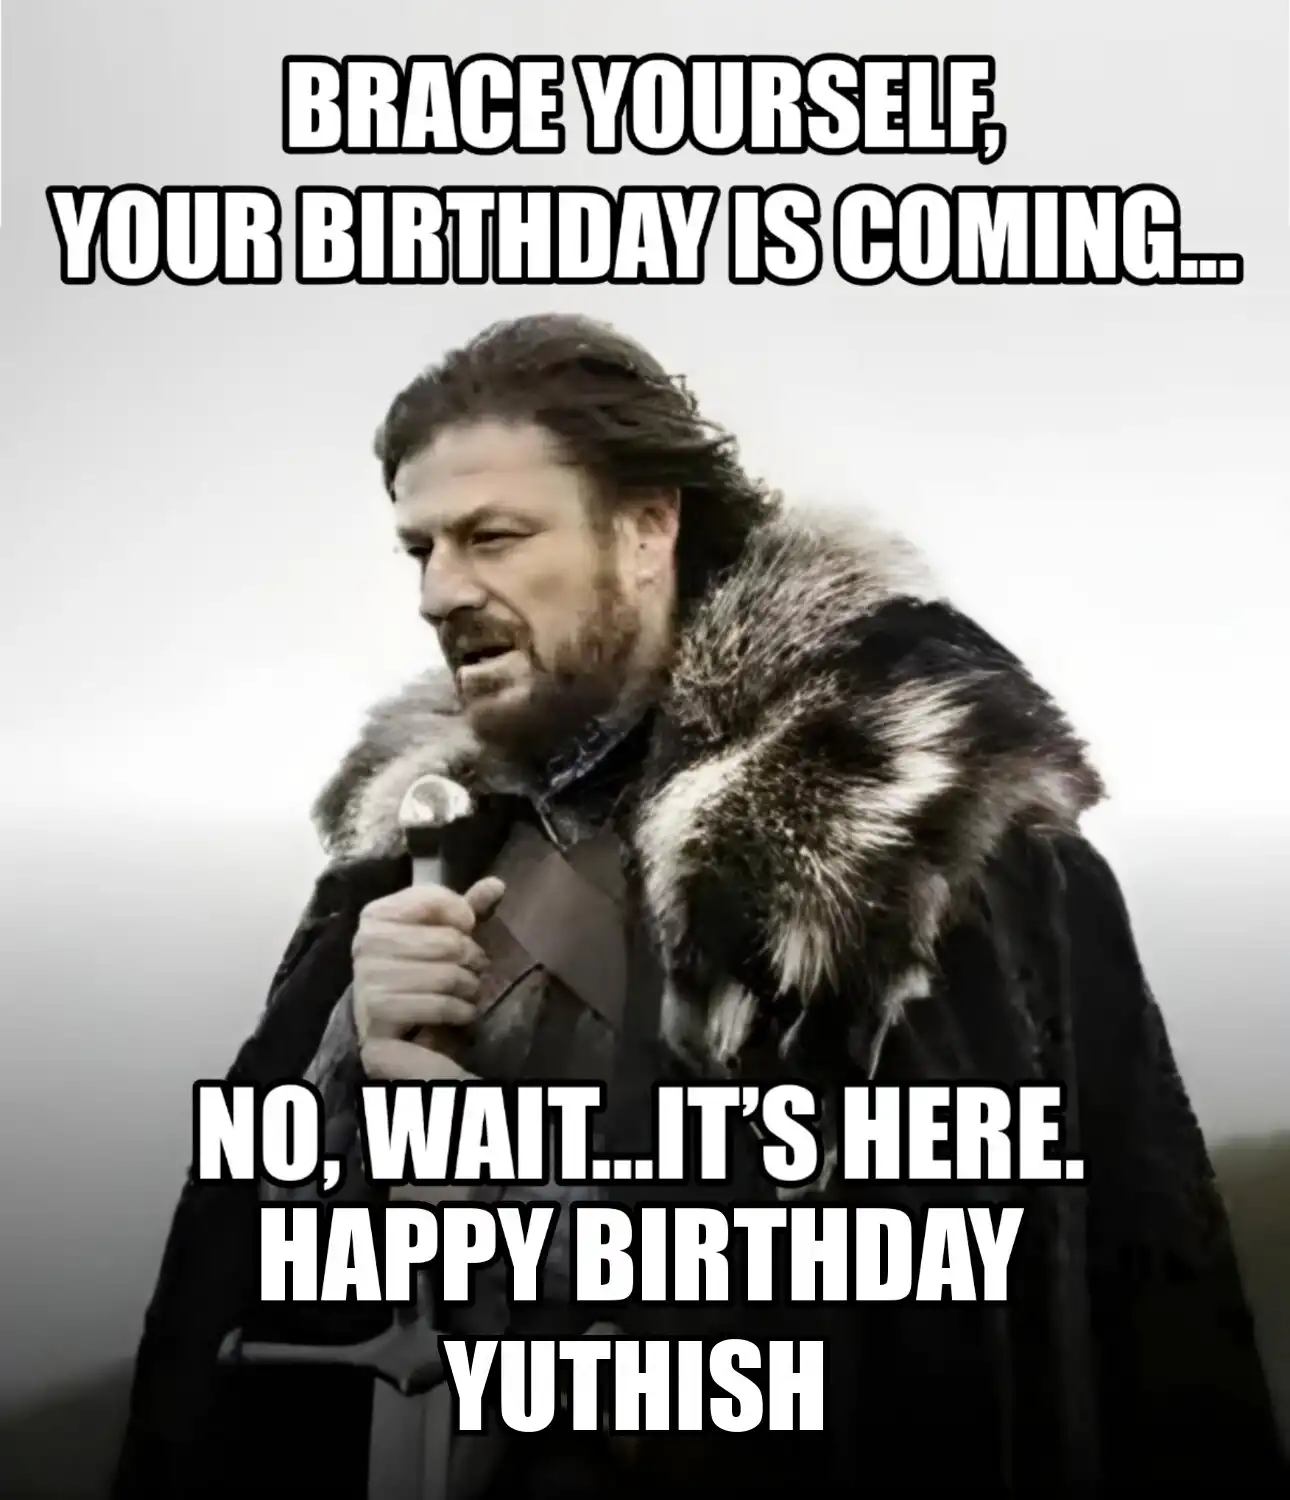 Happy Birthday Yuthish Brace Yourself Your Birthday Is Coming Meme